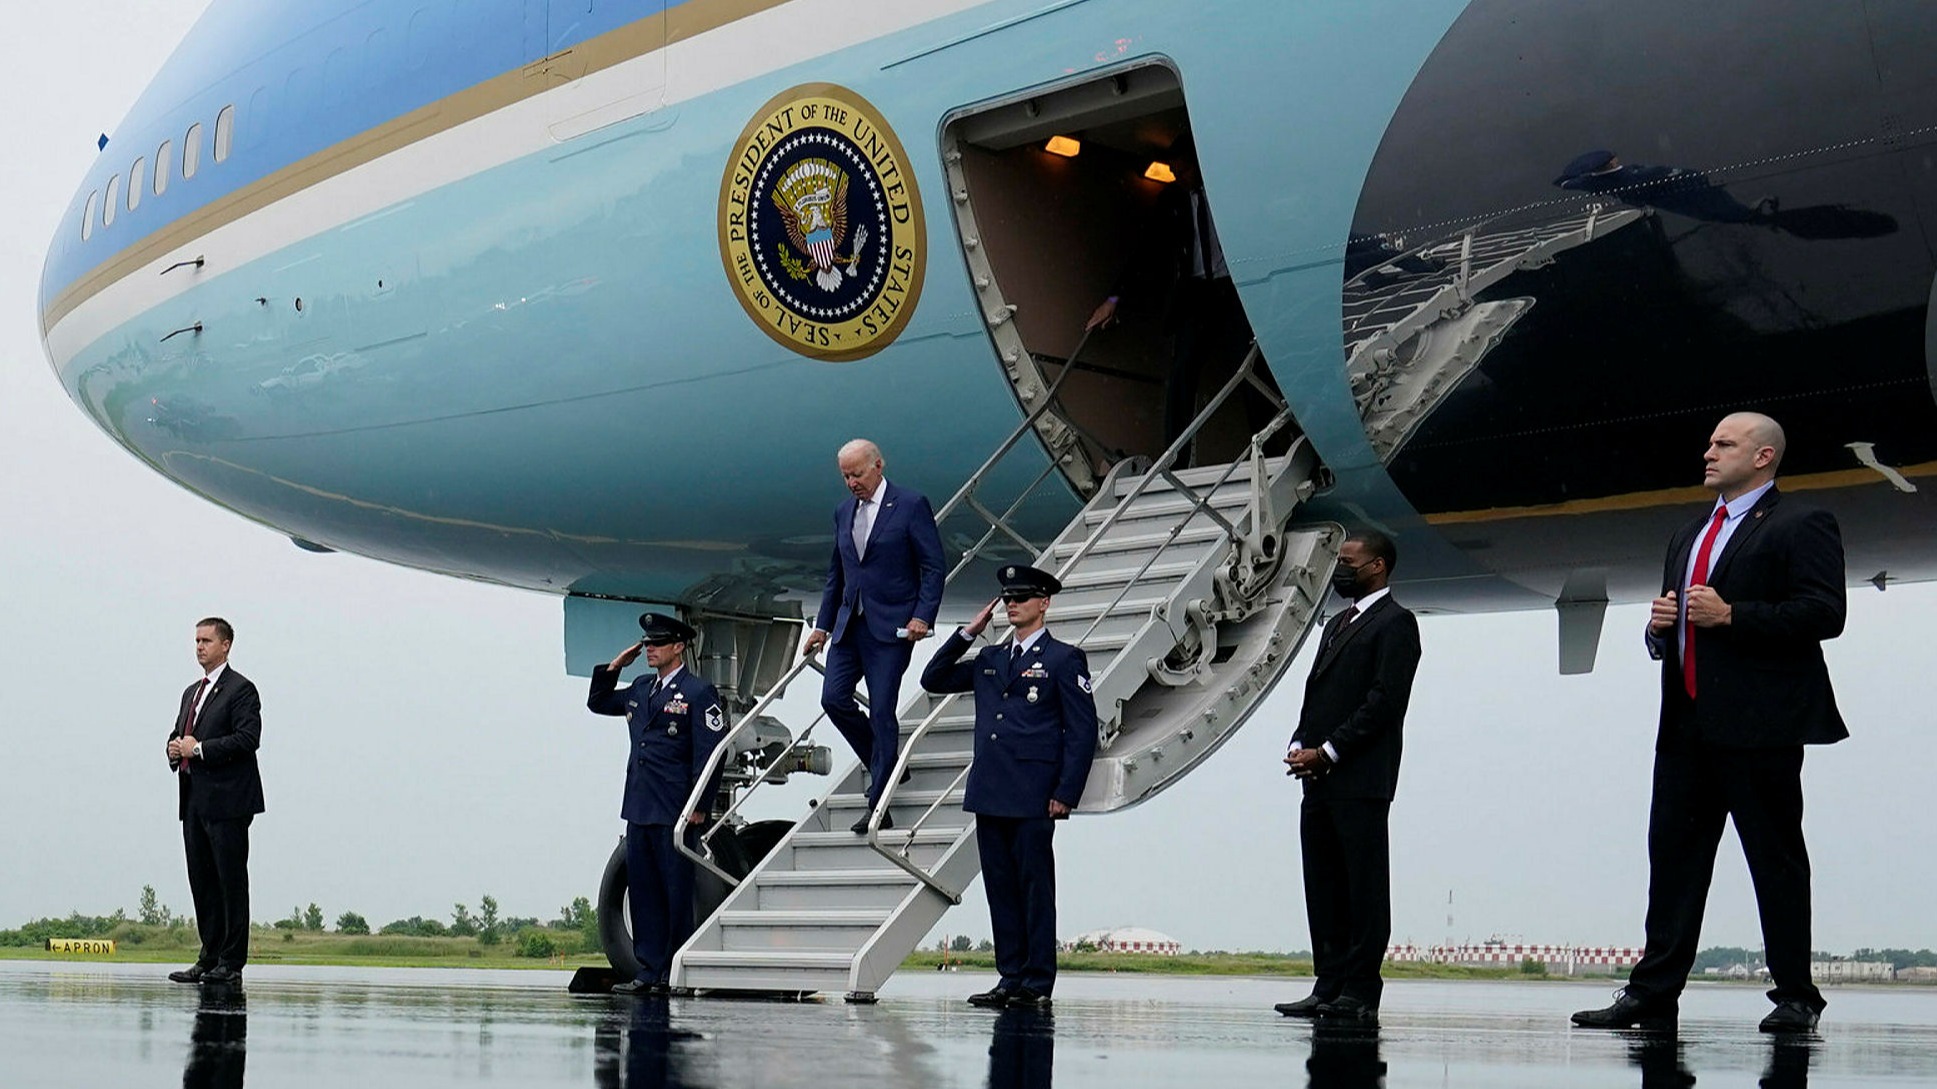 Air Force One: How Boeing's Prestige Project Became Its Albatross |  Financial Times